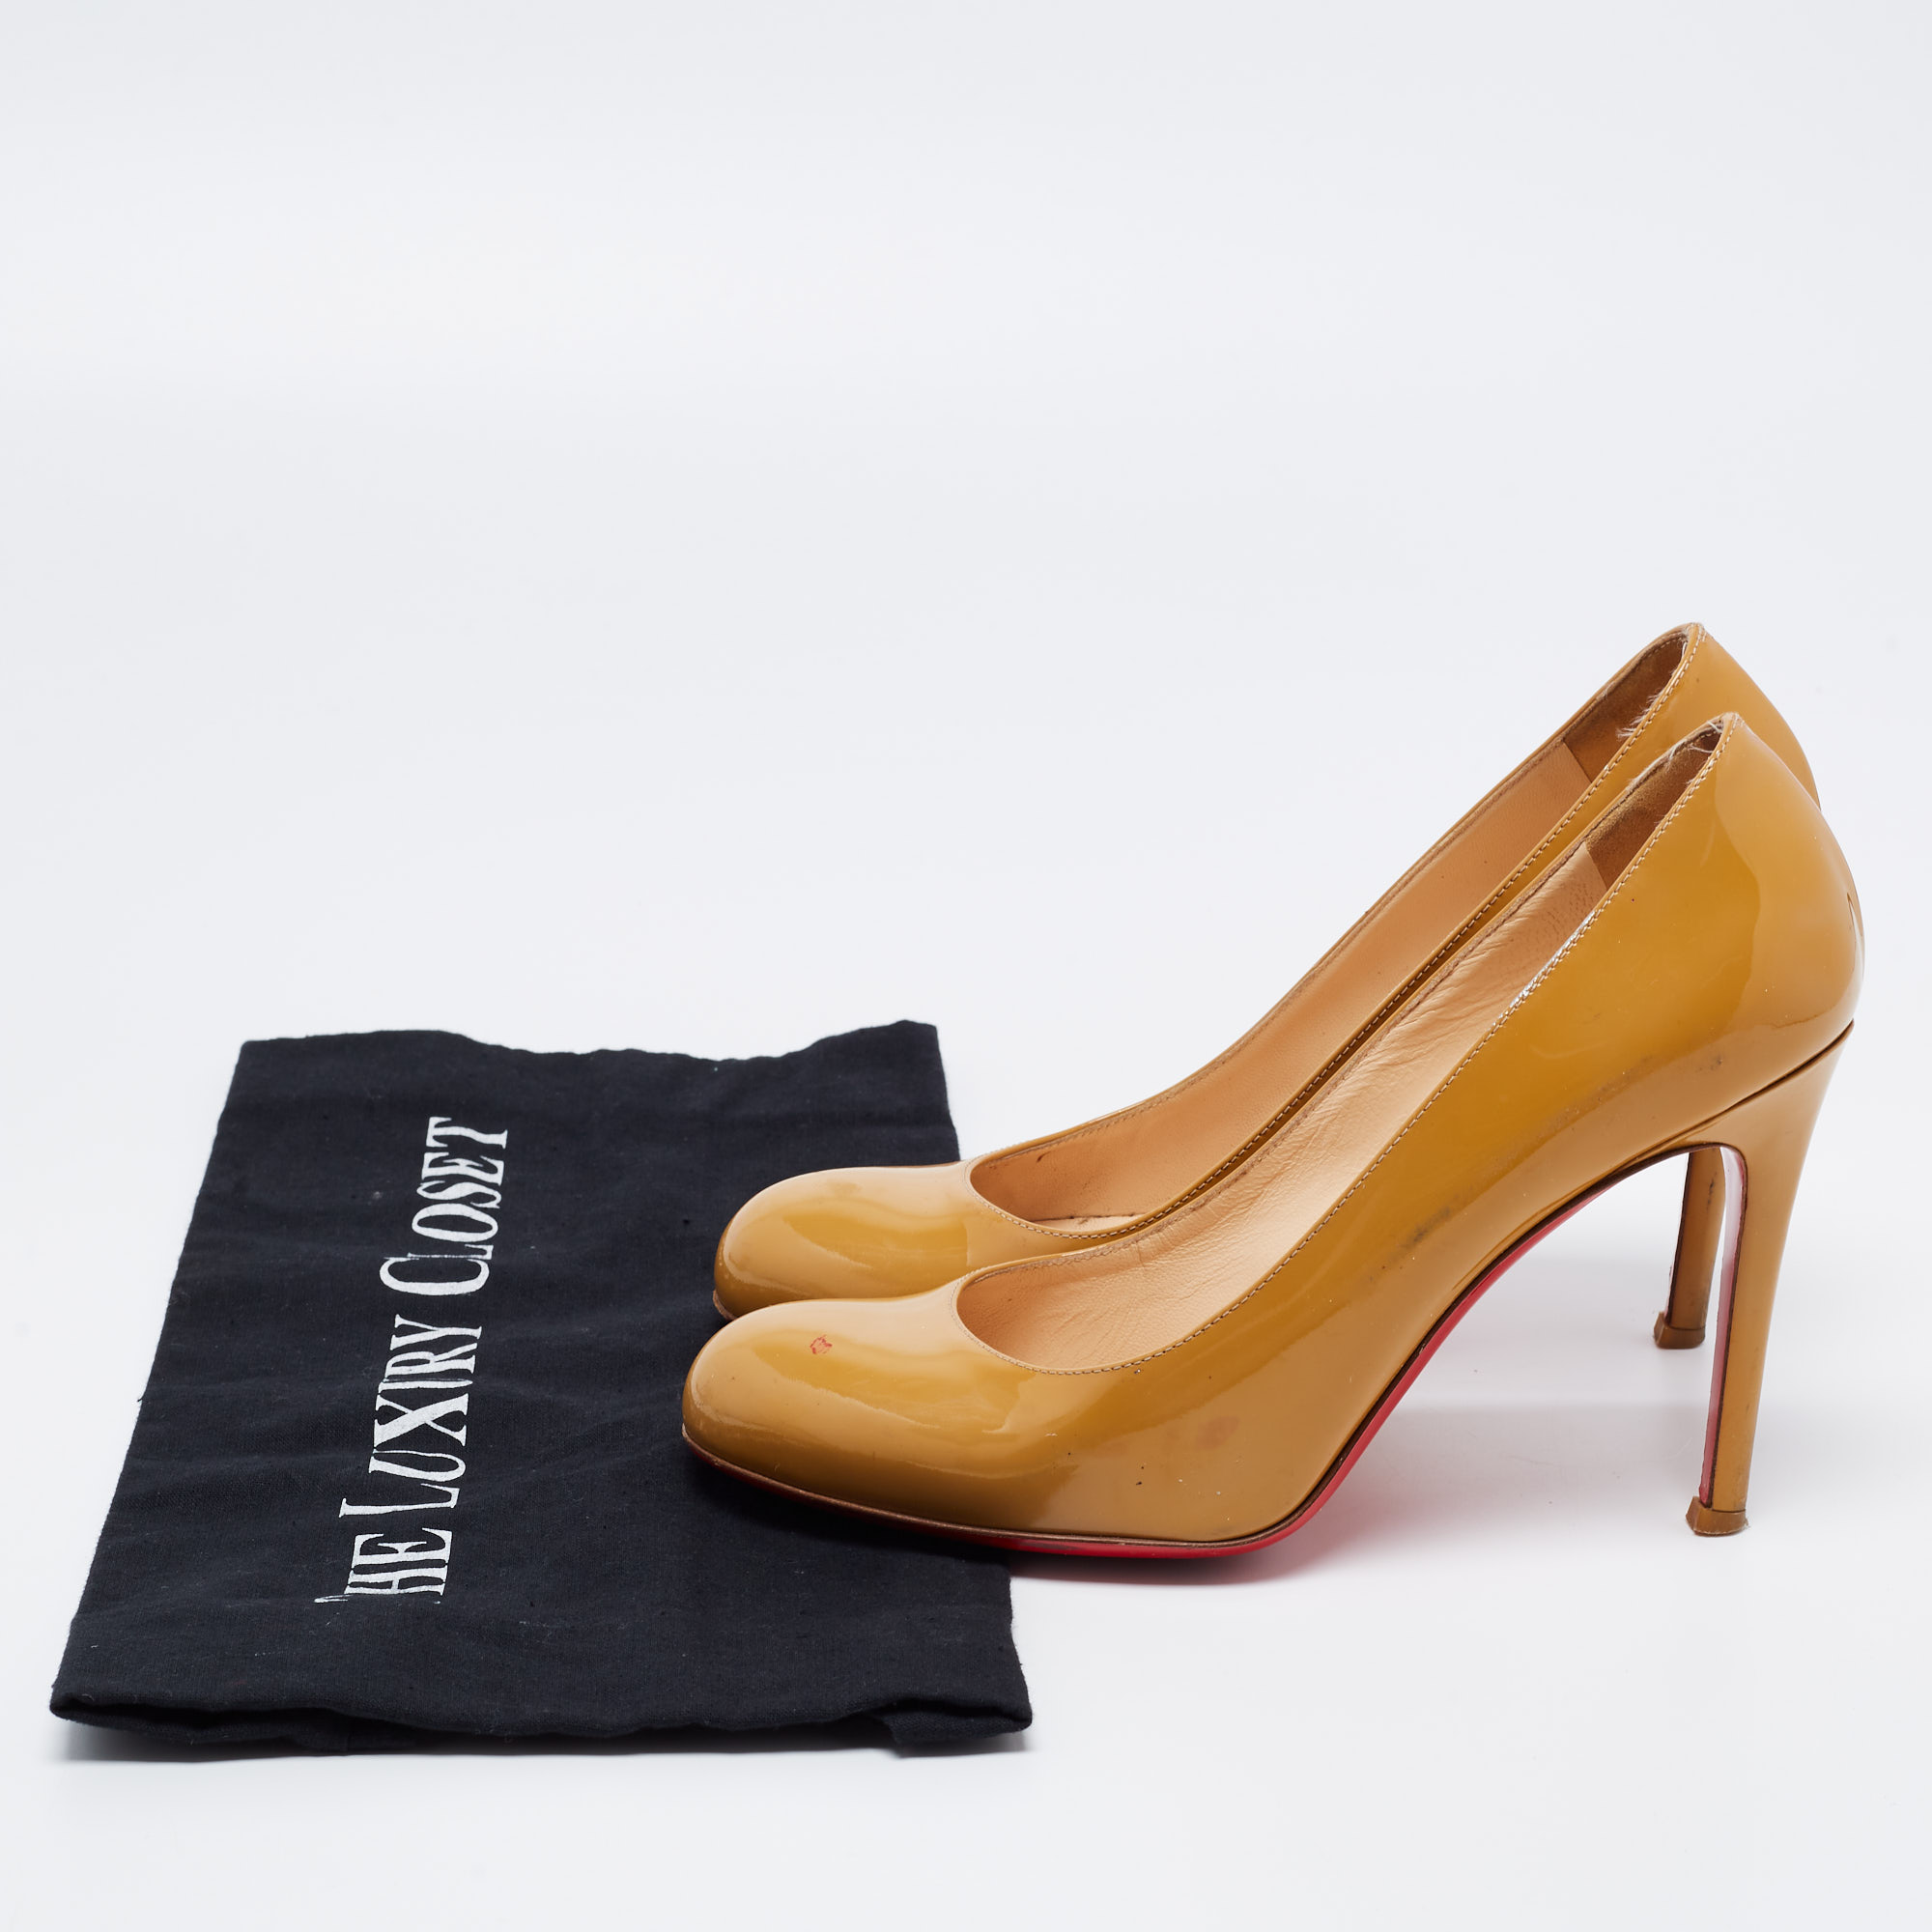 Christian Louboutin Mustard Patent Leather Simple Pumps Size 36.5